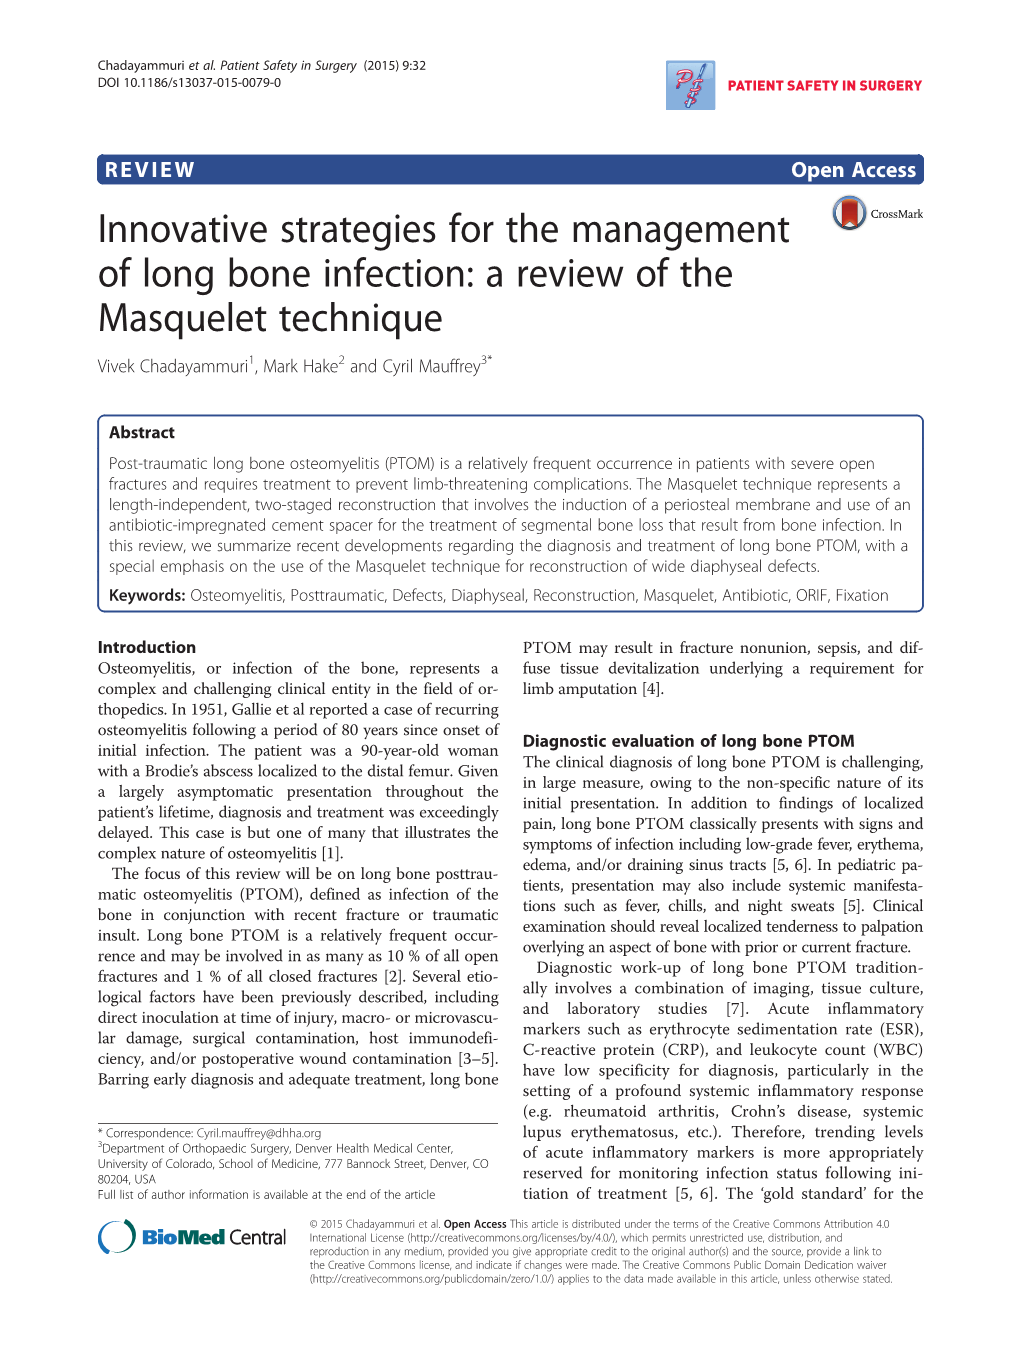 Innovative Strategies for the Management of Long Bone Infection: a Review of the Masquelet Technique Vivek Chadayammuri1, Mark Hake2 and Cyril Mauffrey3*